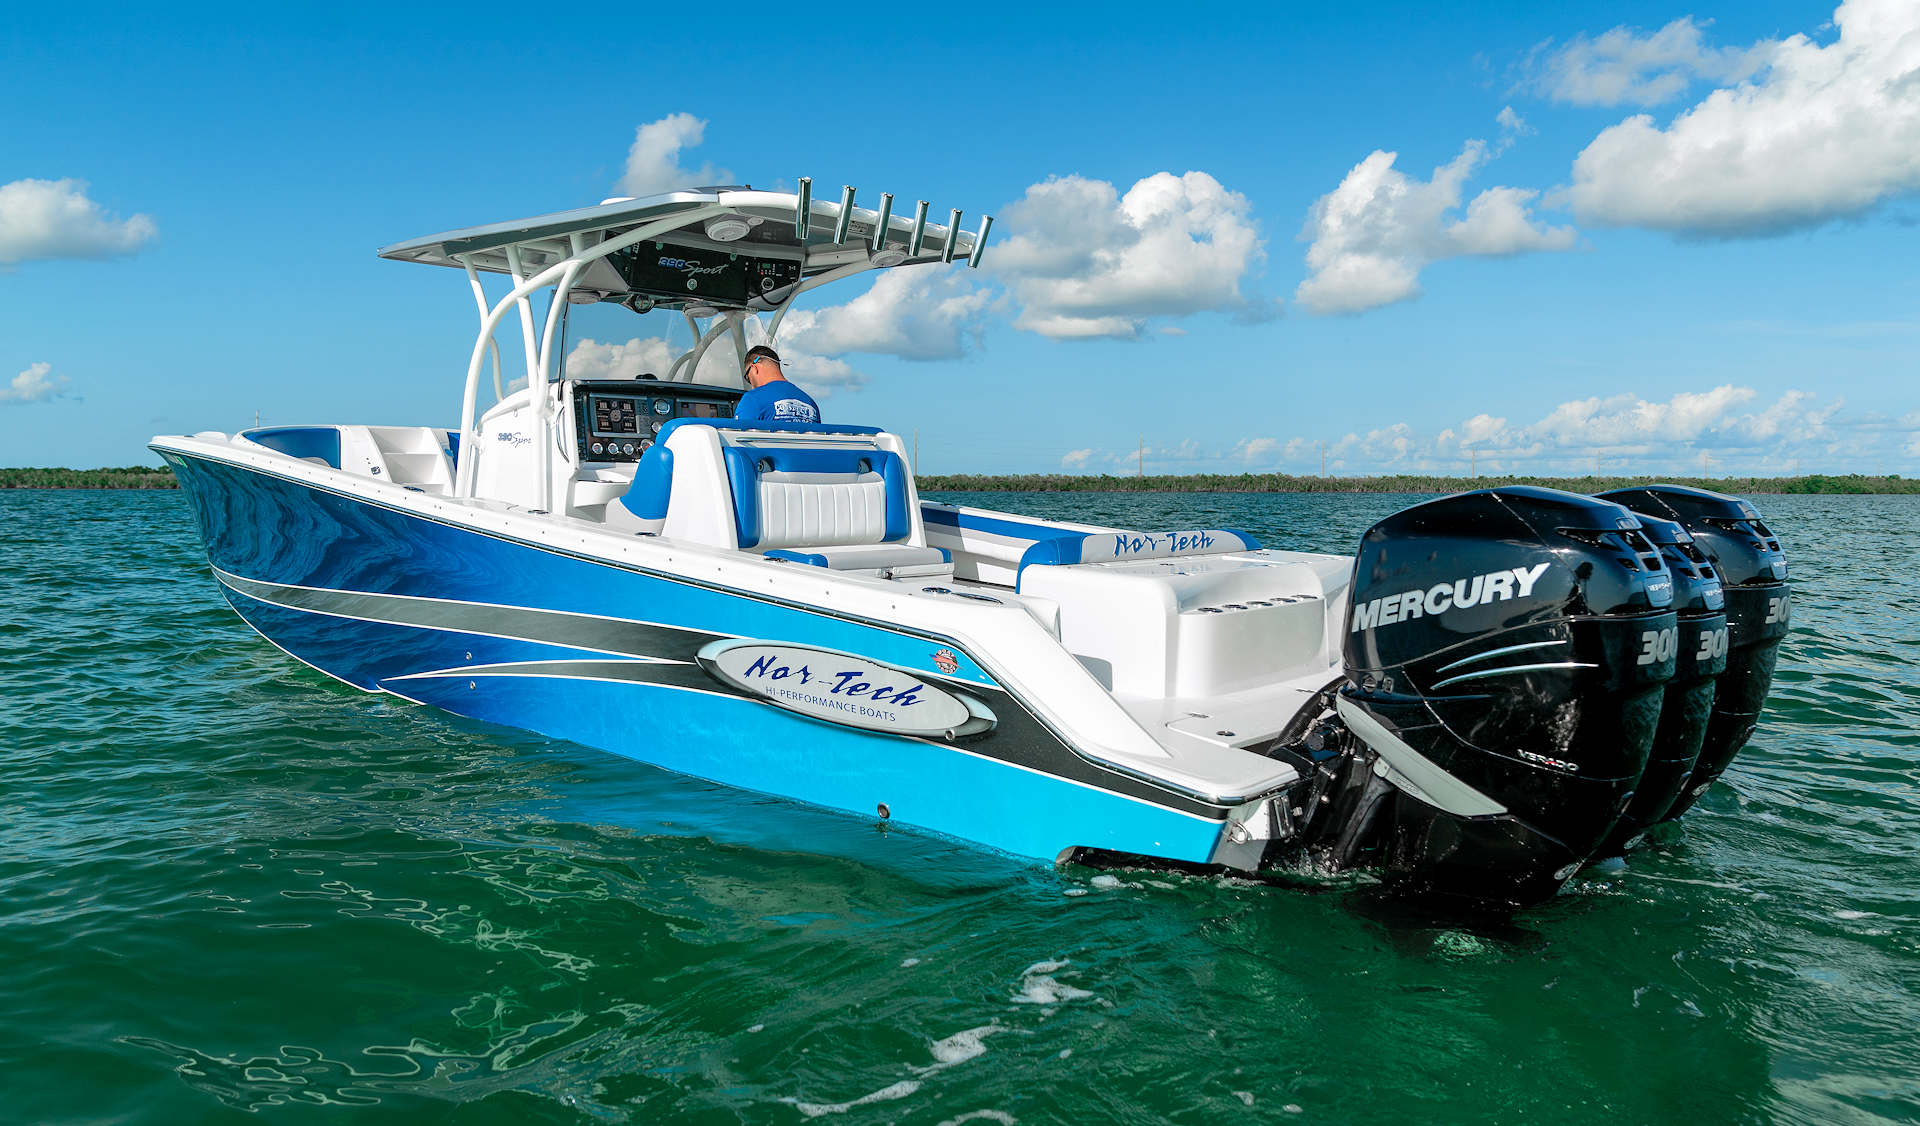 The Marine Web offers boats for sale by dealers in Florida